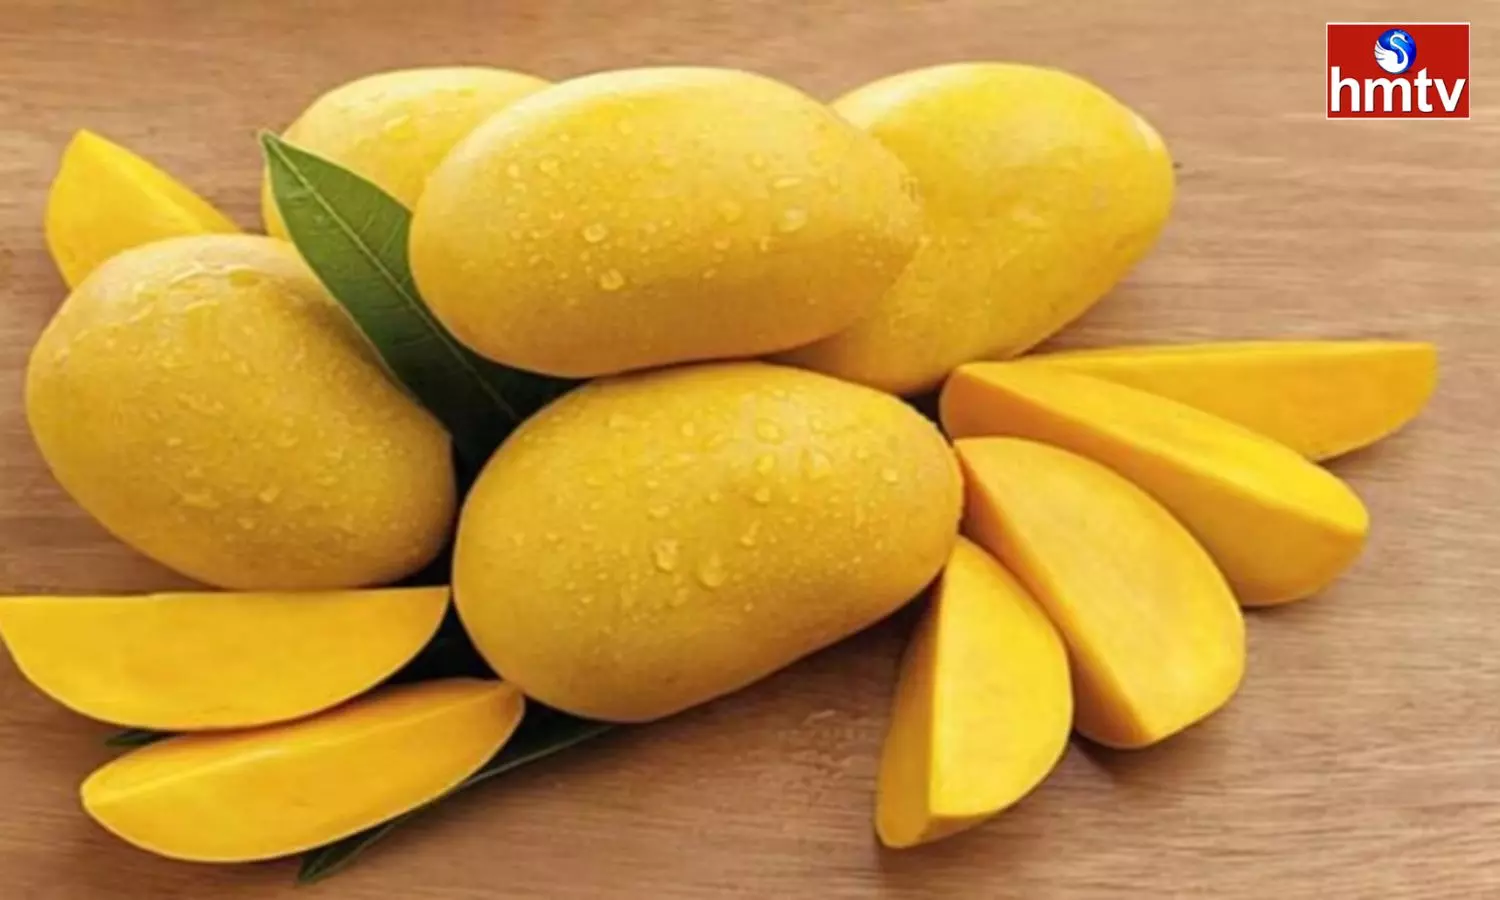 Soak mangoes in water before eating them otherwise you will be in a lot of danger